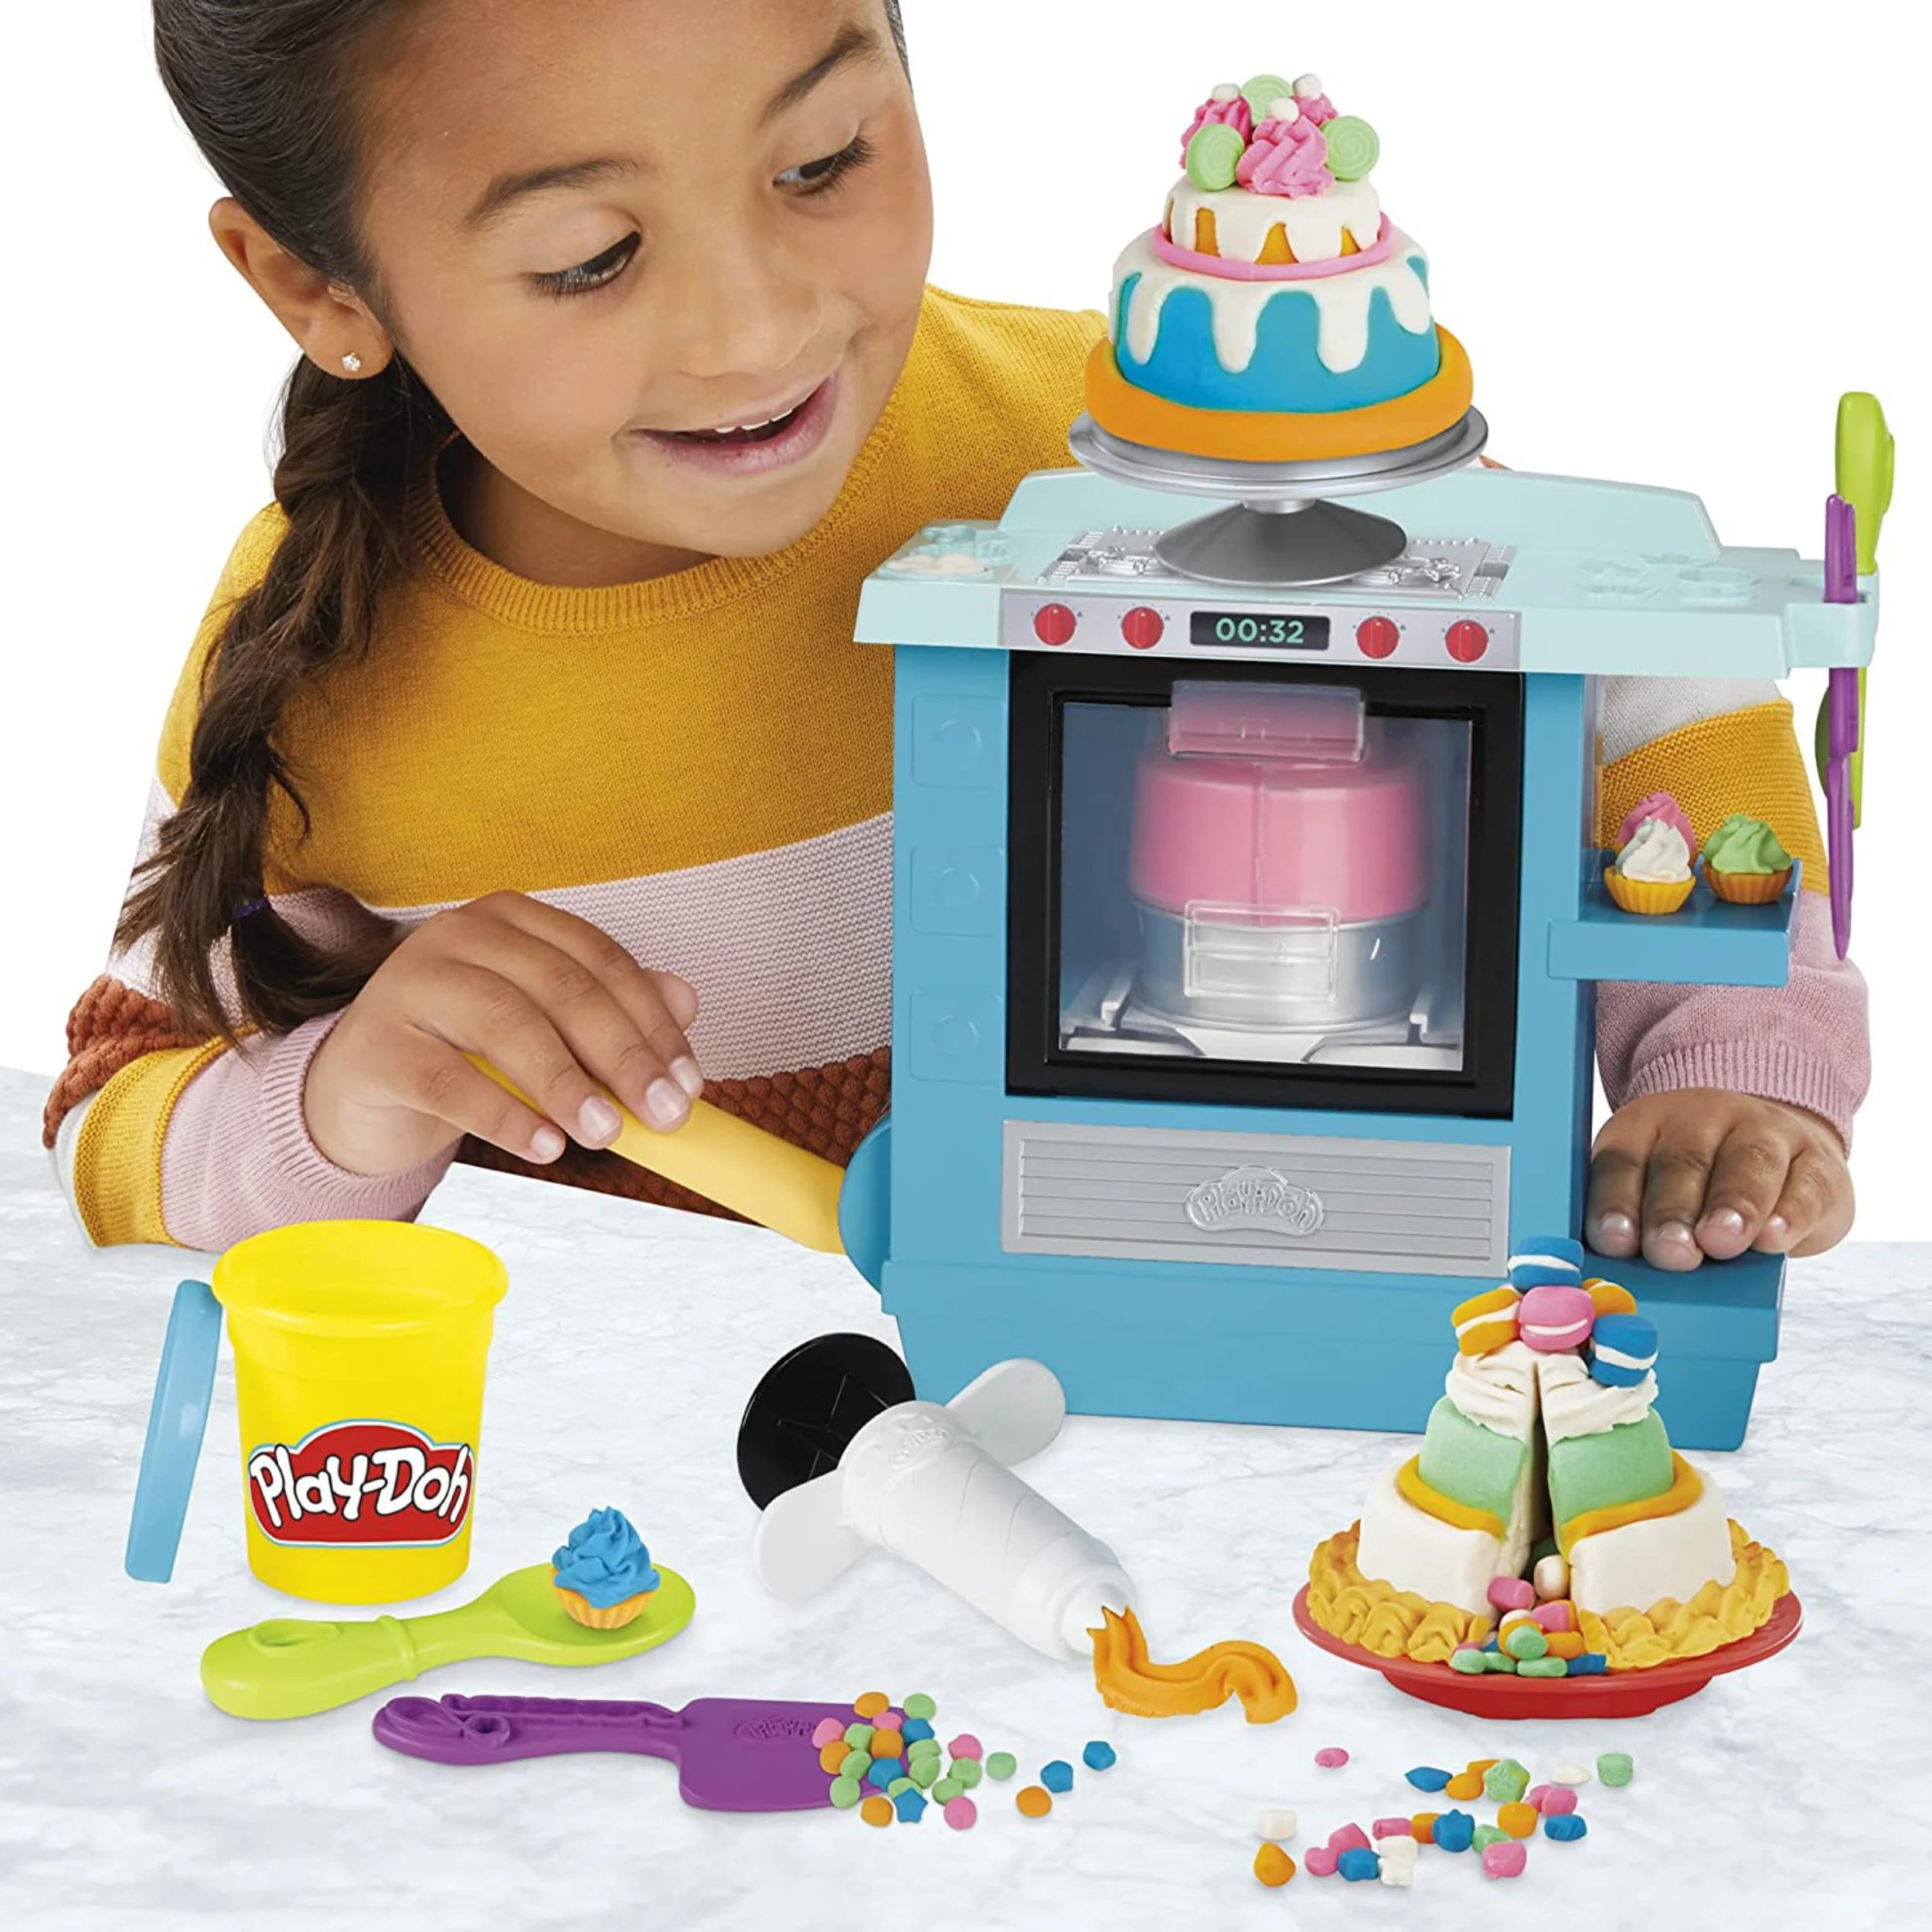 Play-Doh Kitchen Creations Colorful Cafe Play Food Coffee Toy with 5 Colors  - Play-Doh